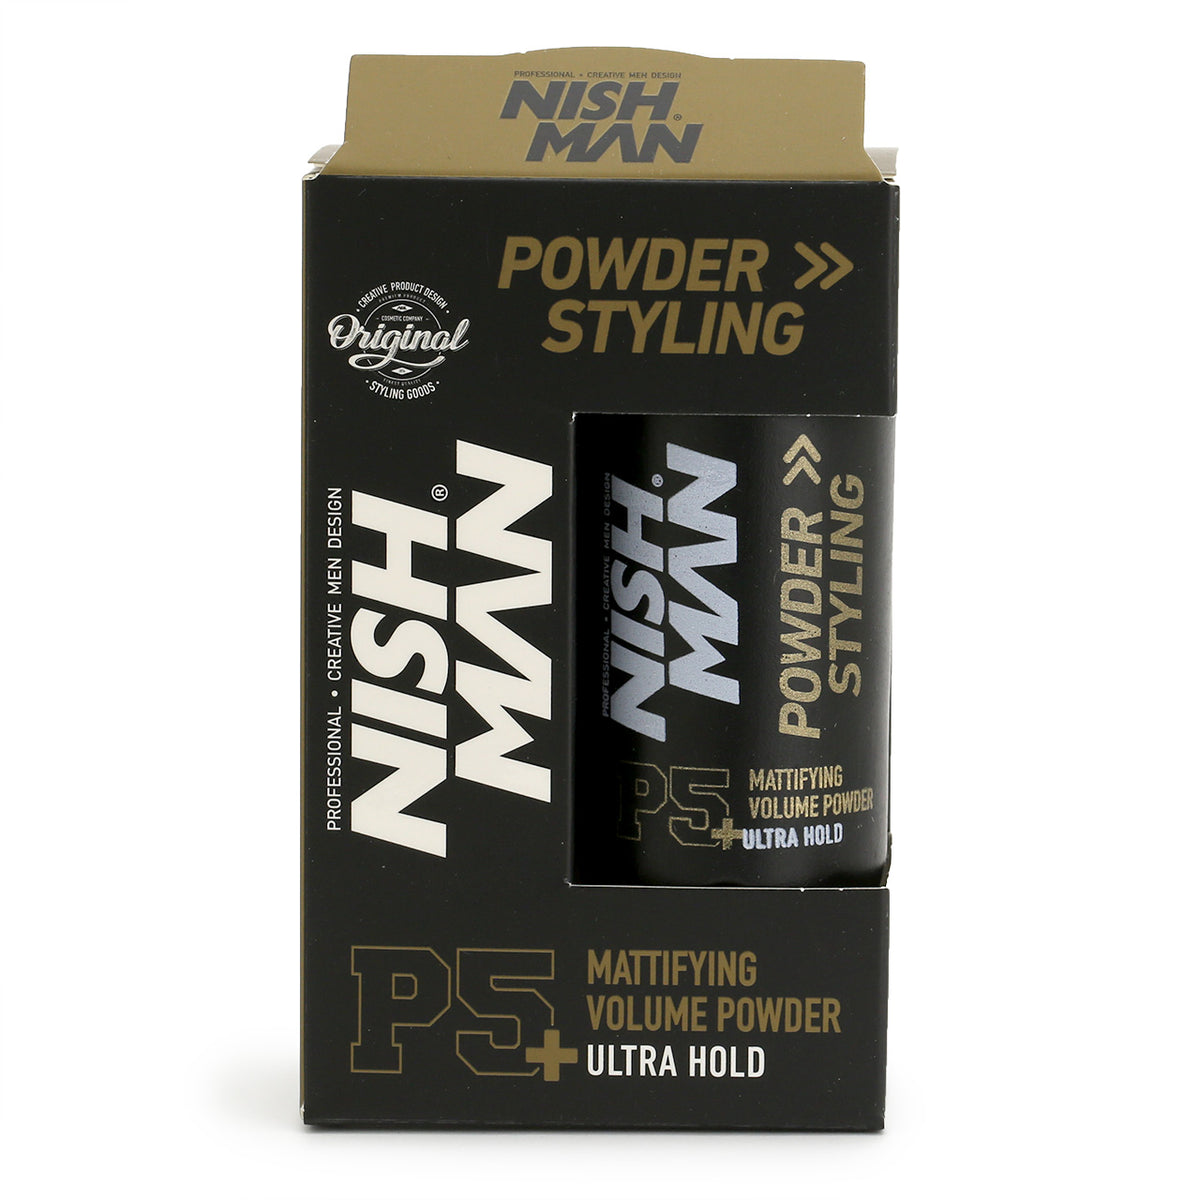 Nishman Powder Styling Ultra-Hold in it&#39;s canister and cardboard packagingthe colouring is mainly black with gold accents and lettering and white logo